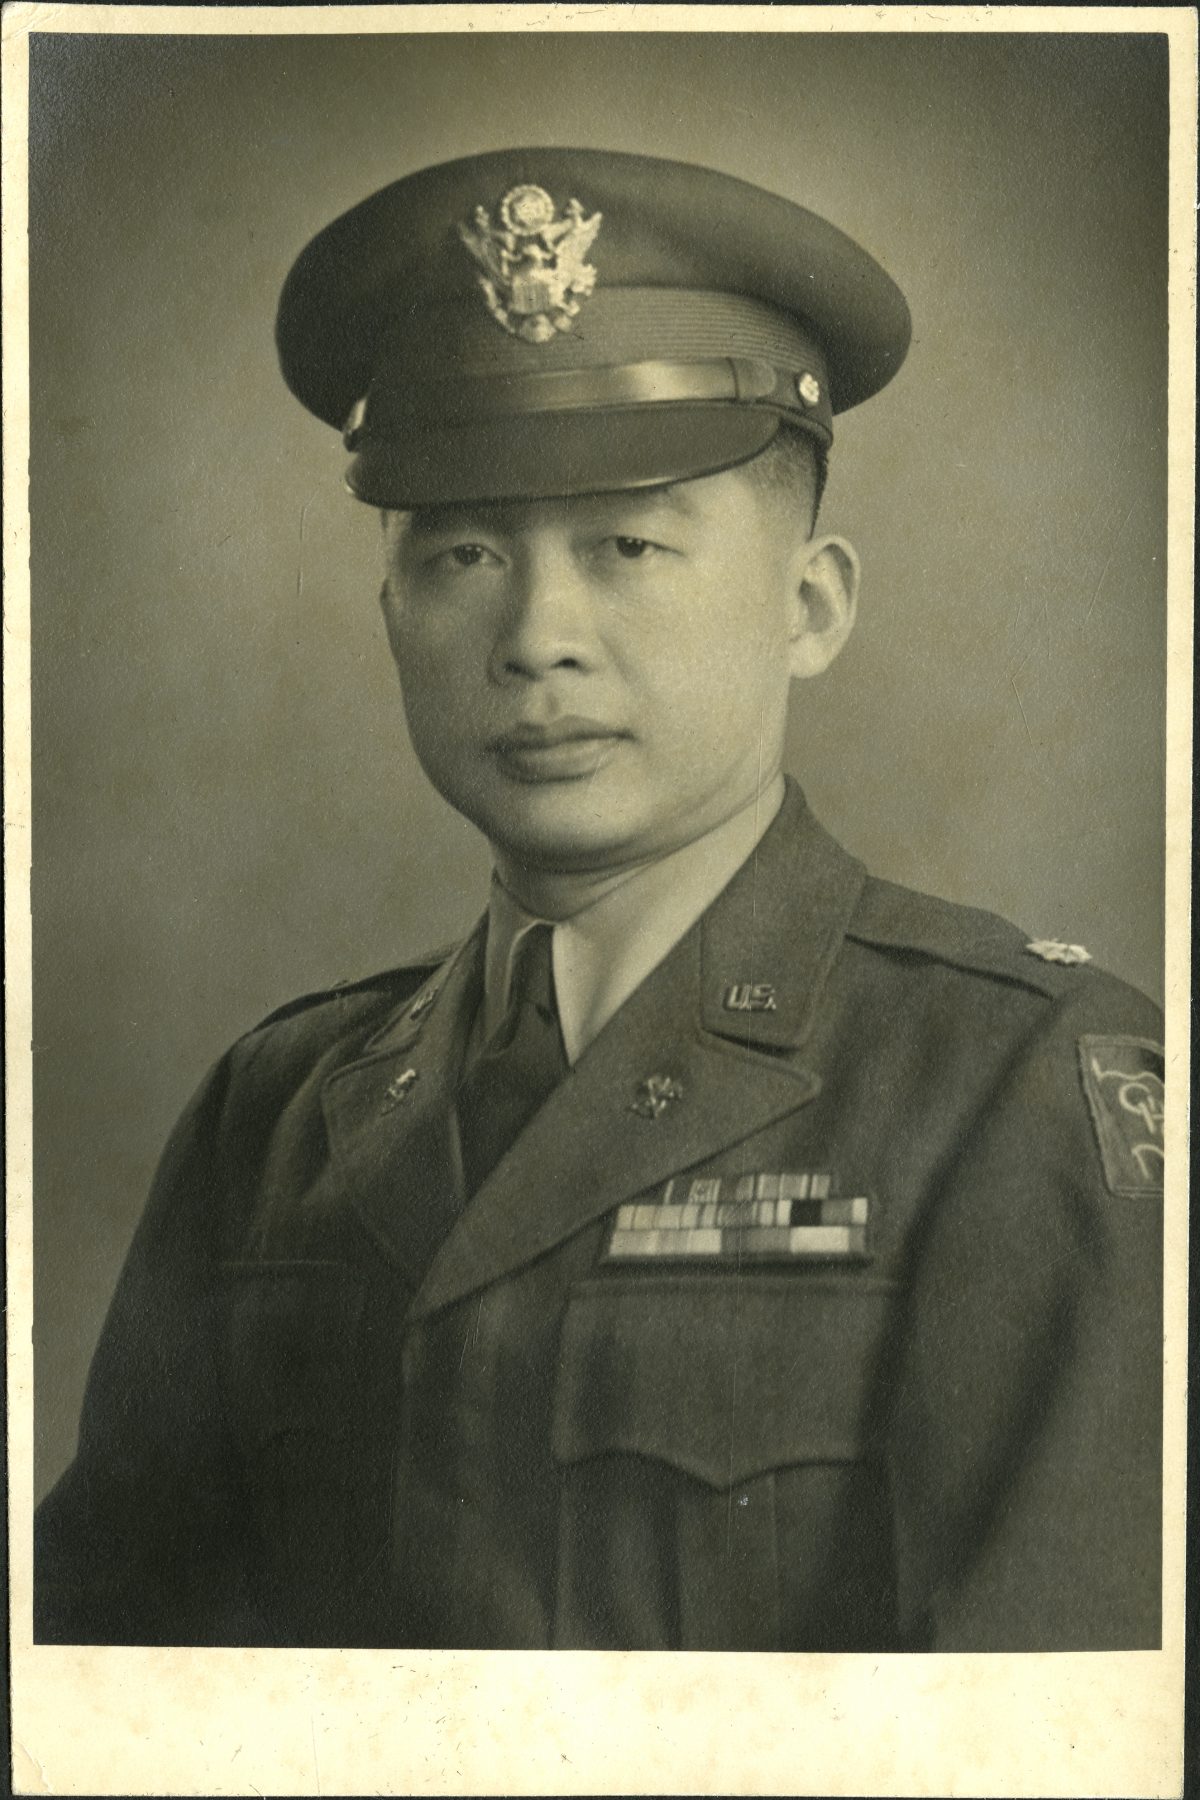 21 October 2019 Posted.
Ernest Eng in uniform; Courtesy of Eng Family, Museum of Chinese in America (MOCA) collection.
身着军装的Ernest Eng；Eng家捐赠，
美国华人博物馆（MOCA）馆藏